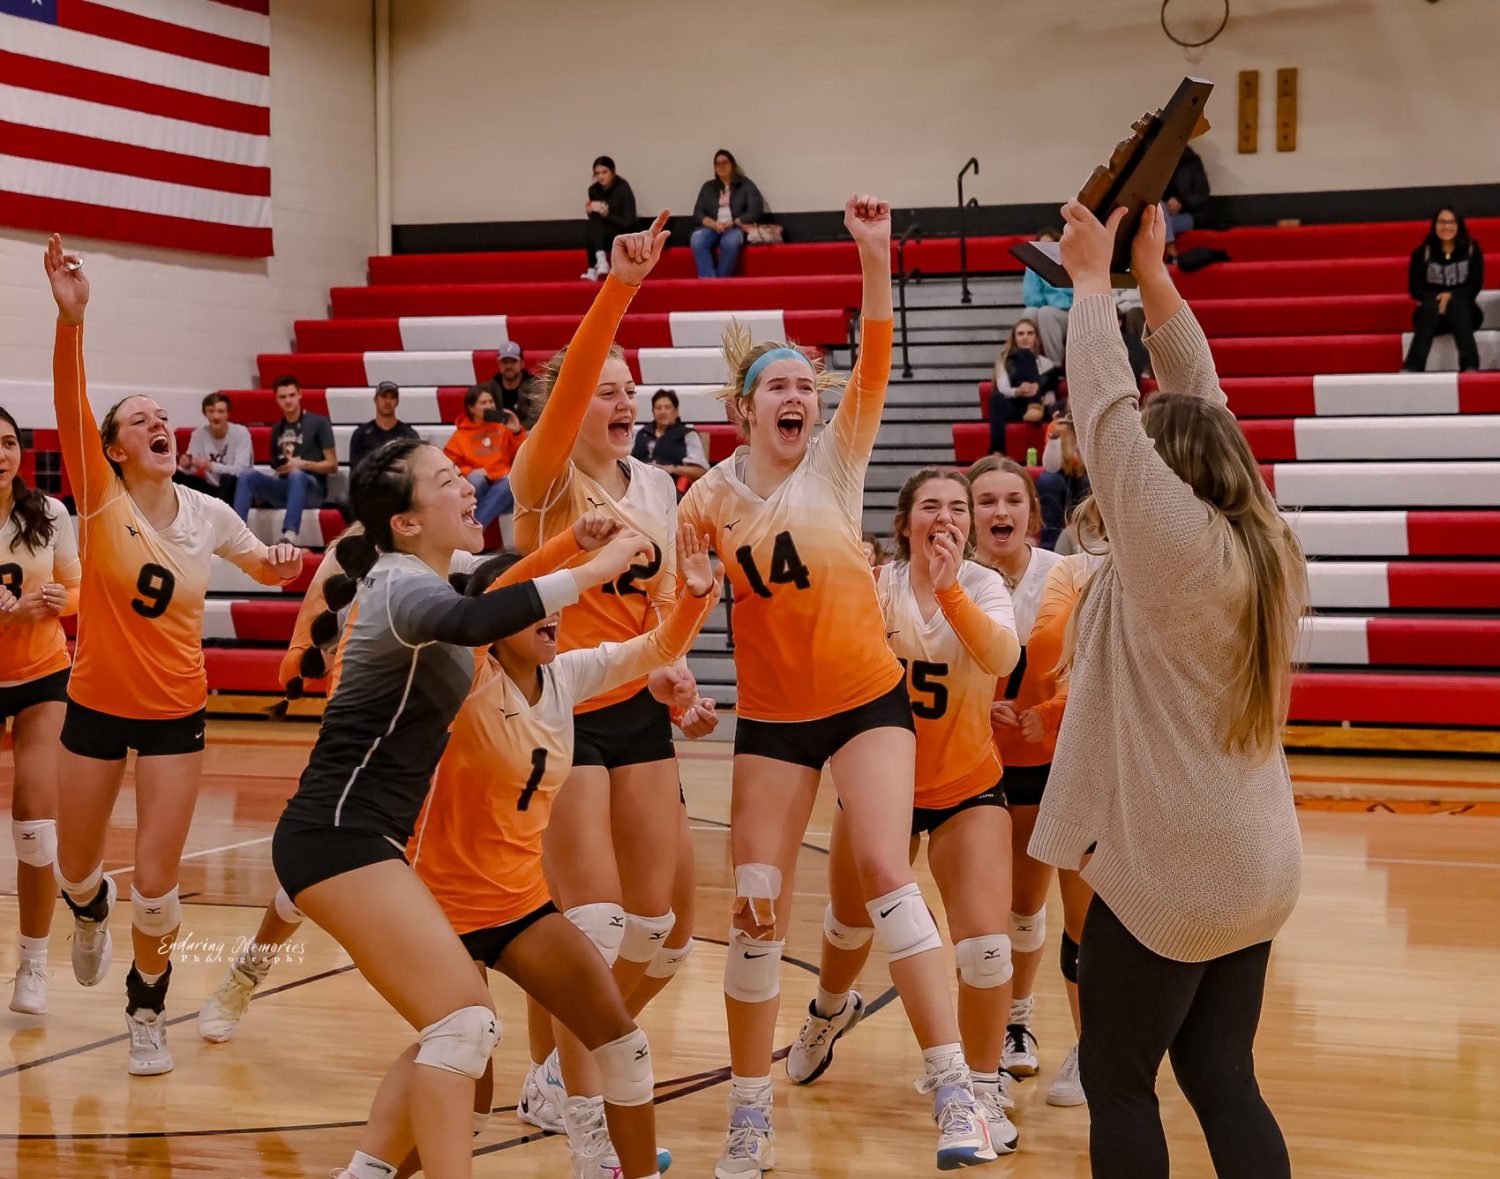 Ludington’s district volleyball drought comes to an abrupt halt with victory over Big Rapids